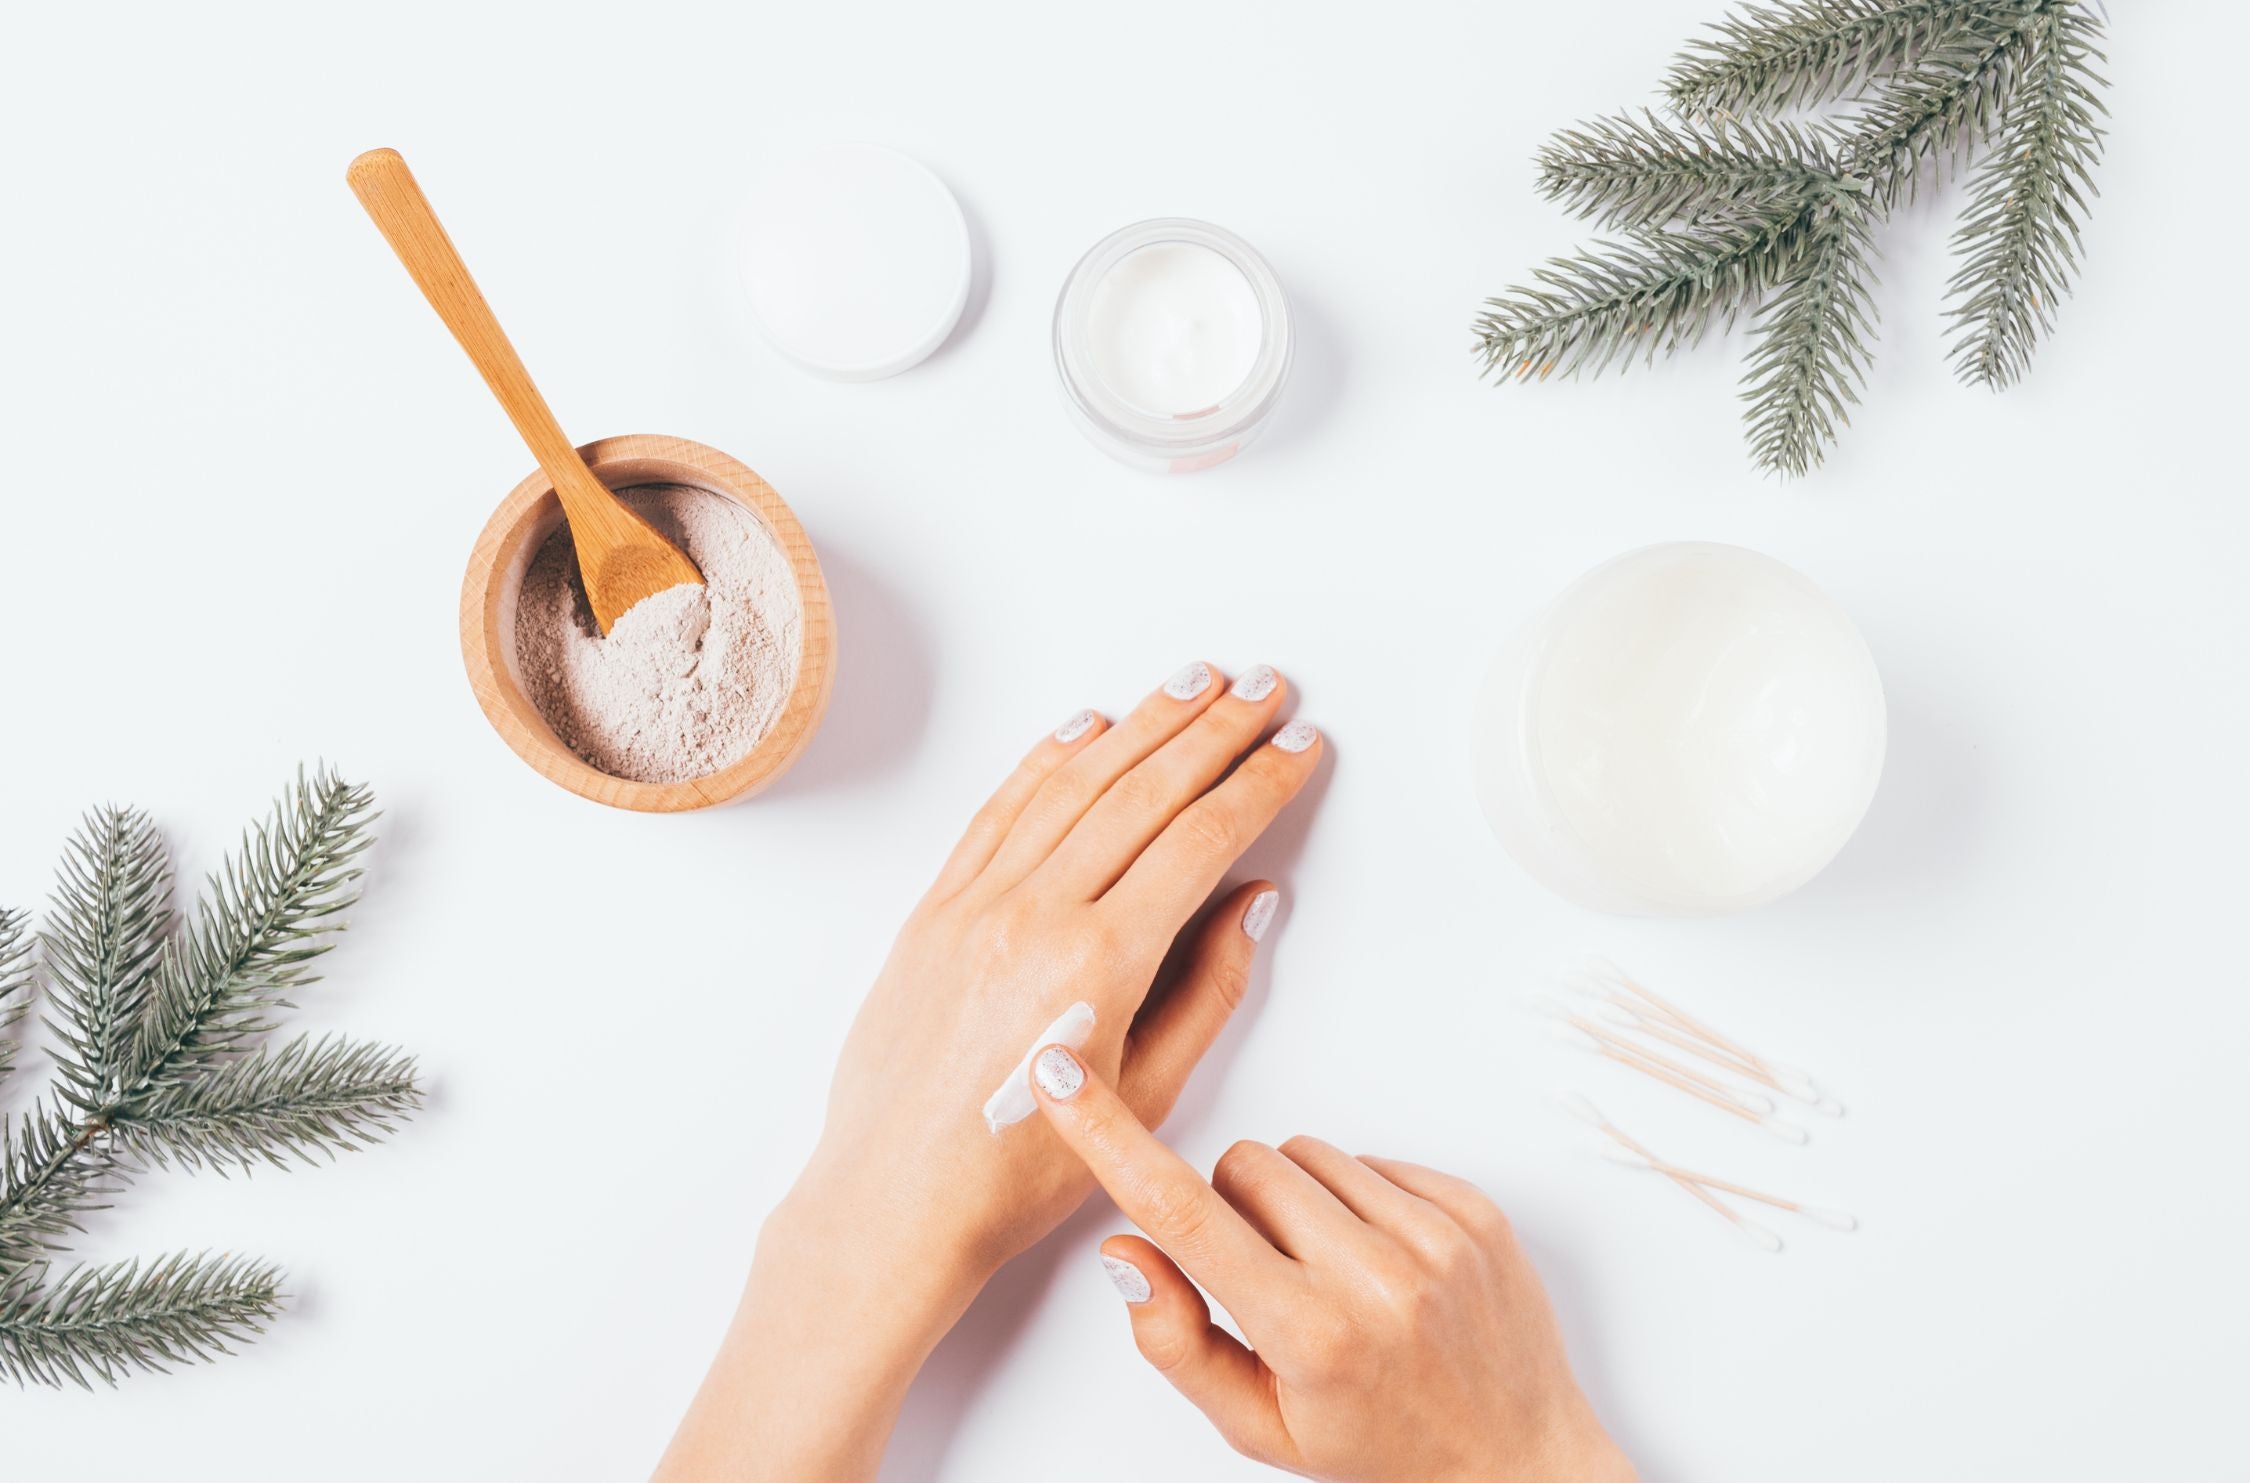 The TOP 4 Ways to Overcome Dry Skin this Winter